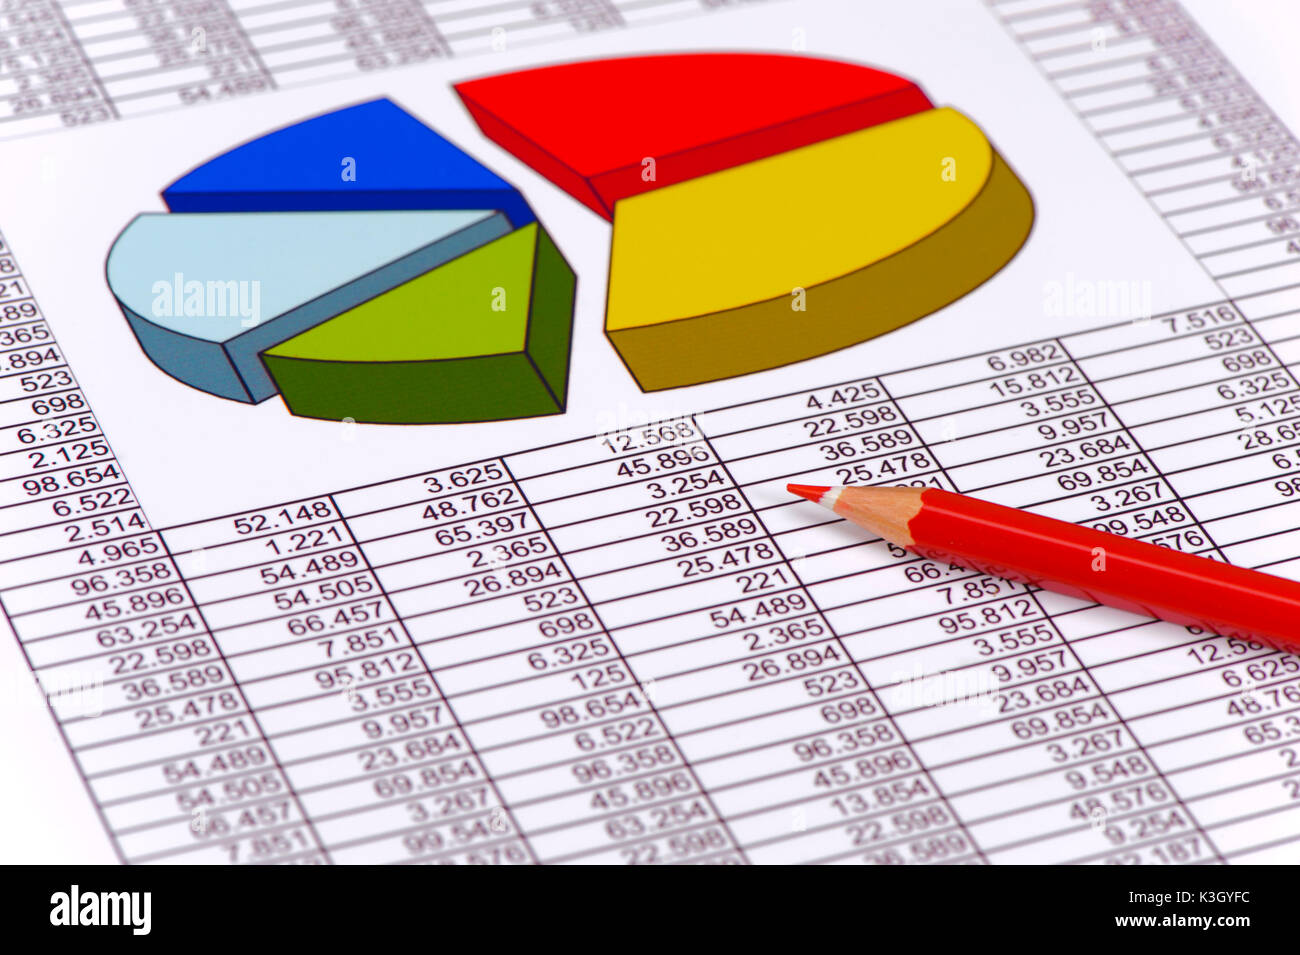 Finances with chart and red pen Stock Photo